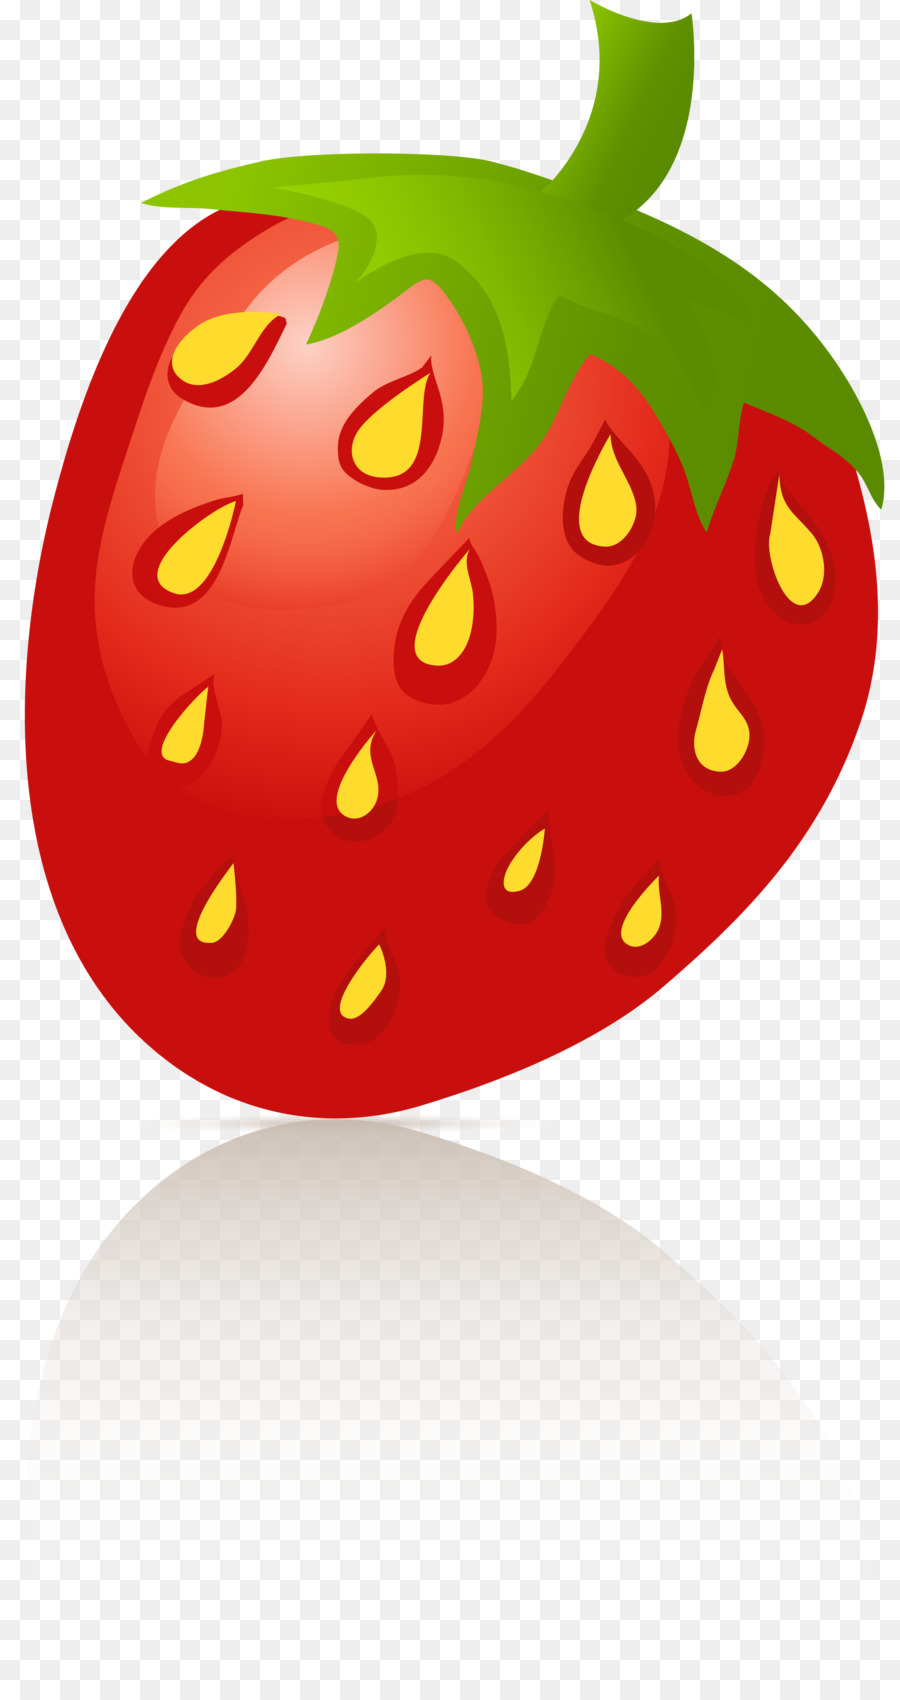 Strawberry Sigel Bell pepper Clip art - boards clipart png download - 2362*4433 - Free Transparent Strawberry png Download.